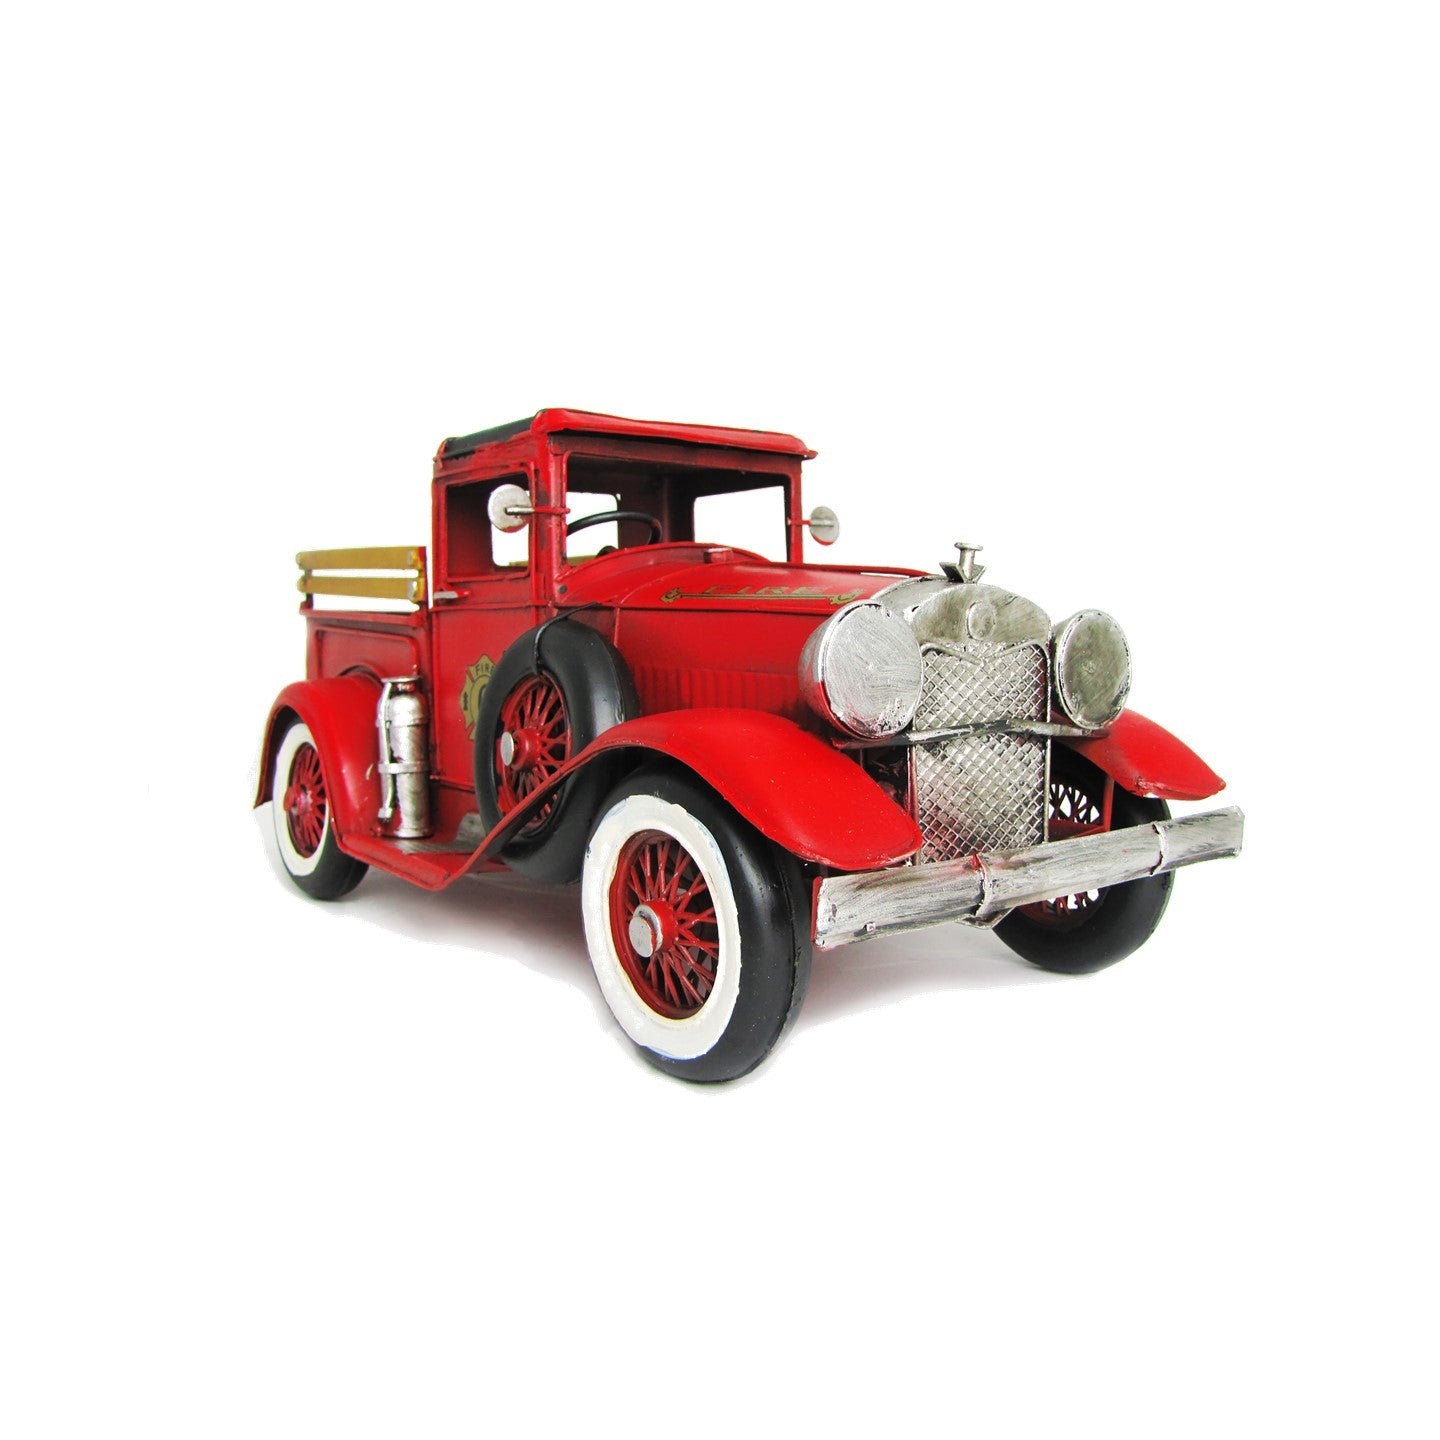 12.6" Antique Style Model American Fire Truck